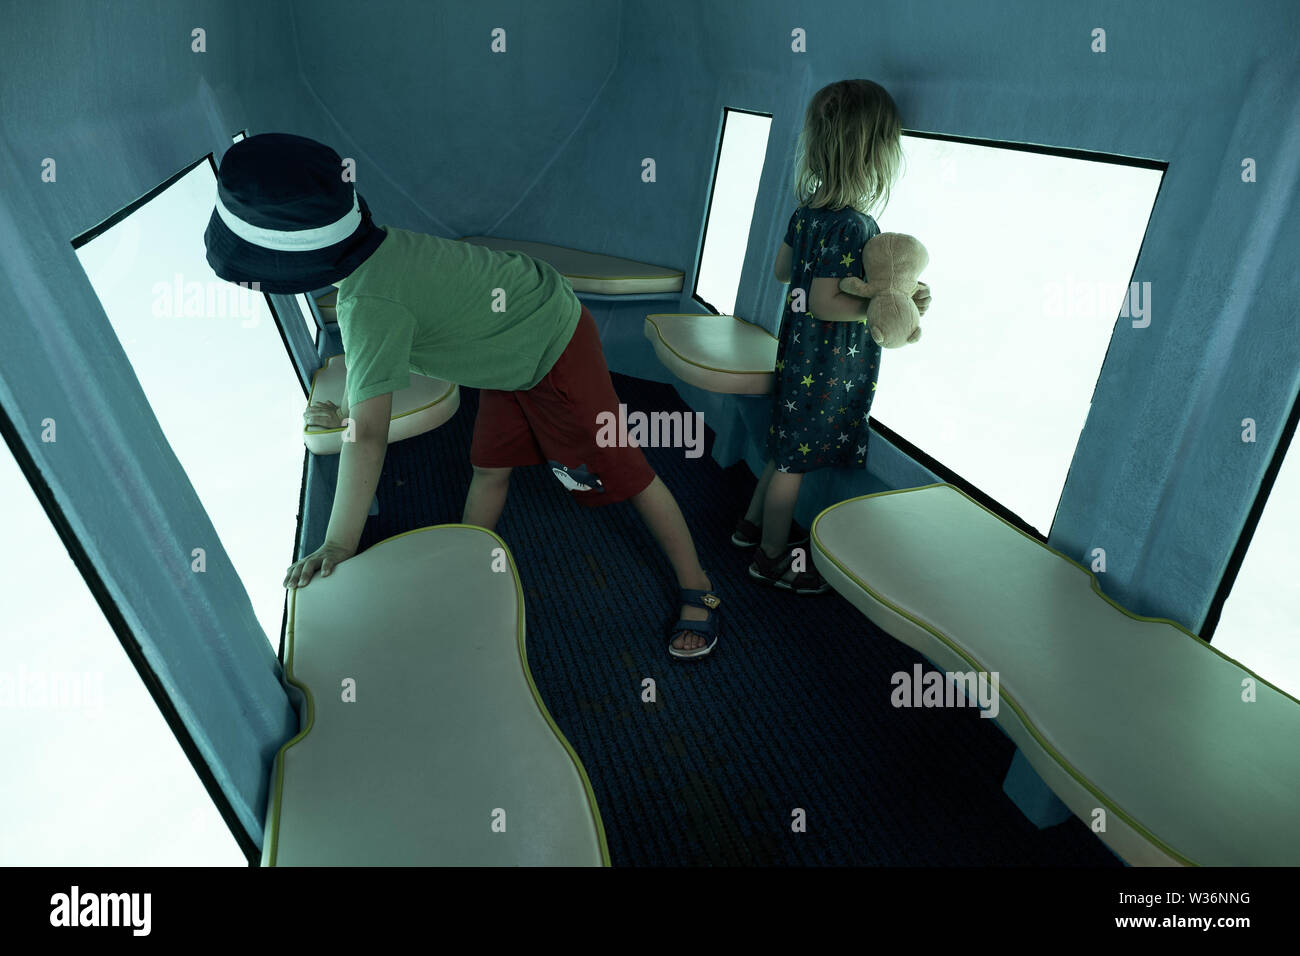 3 and 5 years old kids looking through the window of a glass bottom boat navigating through the Adriatic sea off the coast of Krk Island, Croatia Stock Photo